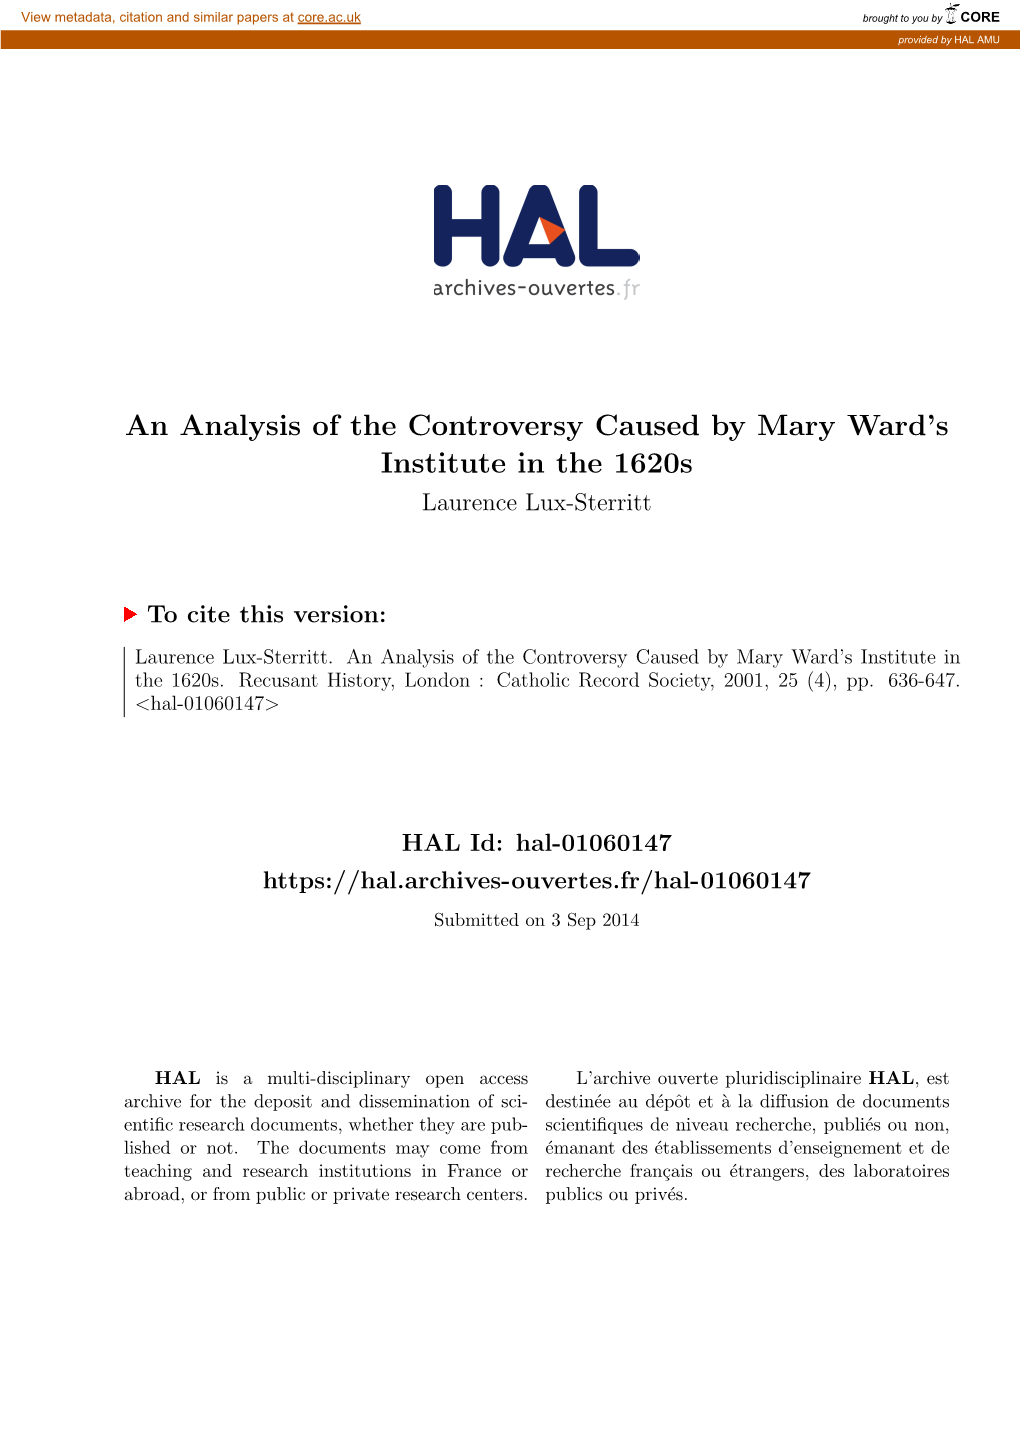 An Analysis of the Controversy Caused by Mary Ward's Institute In